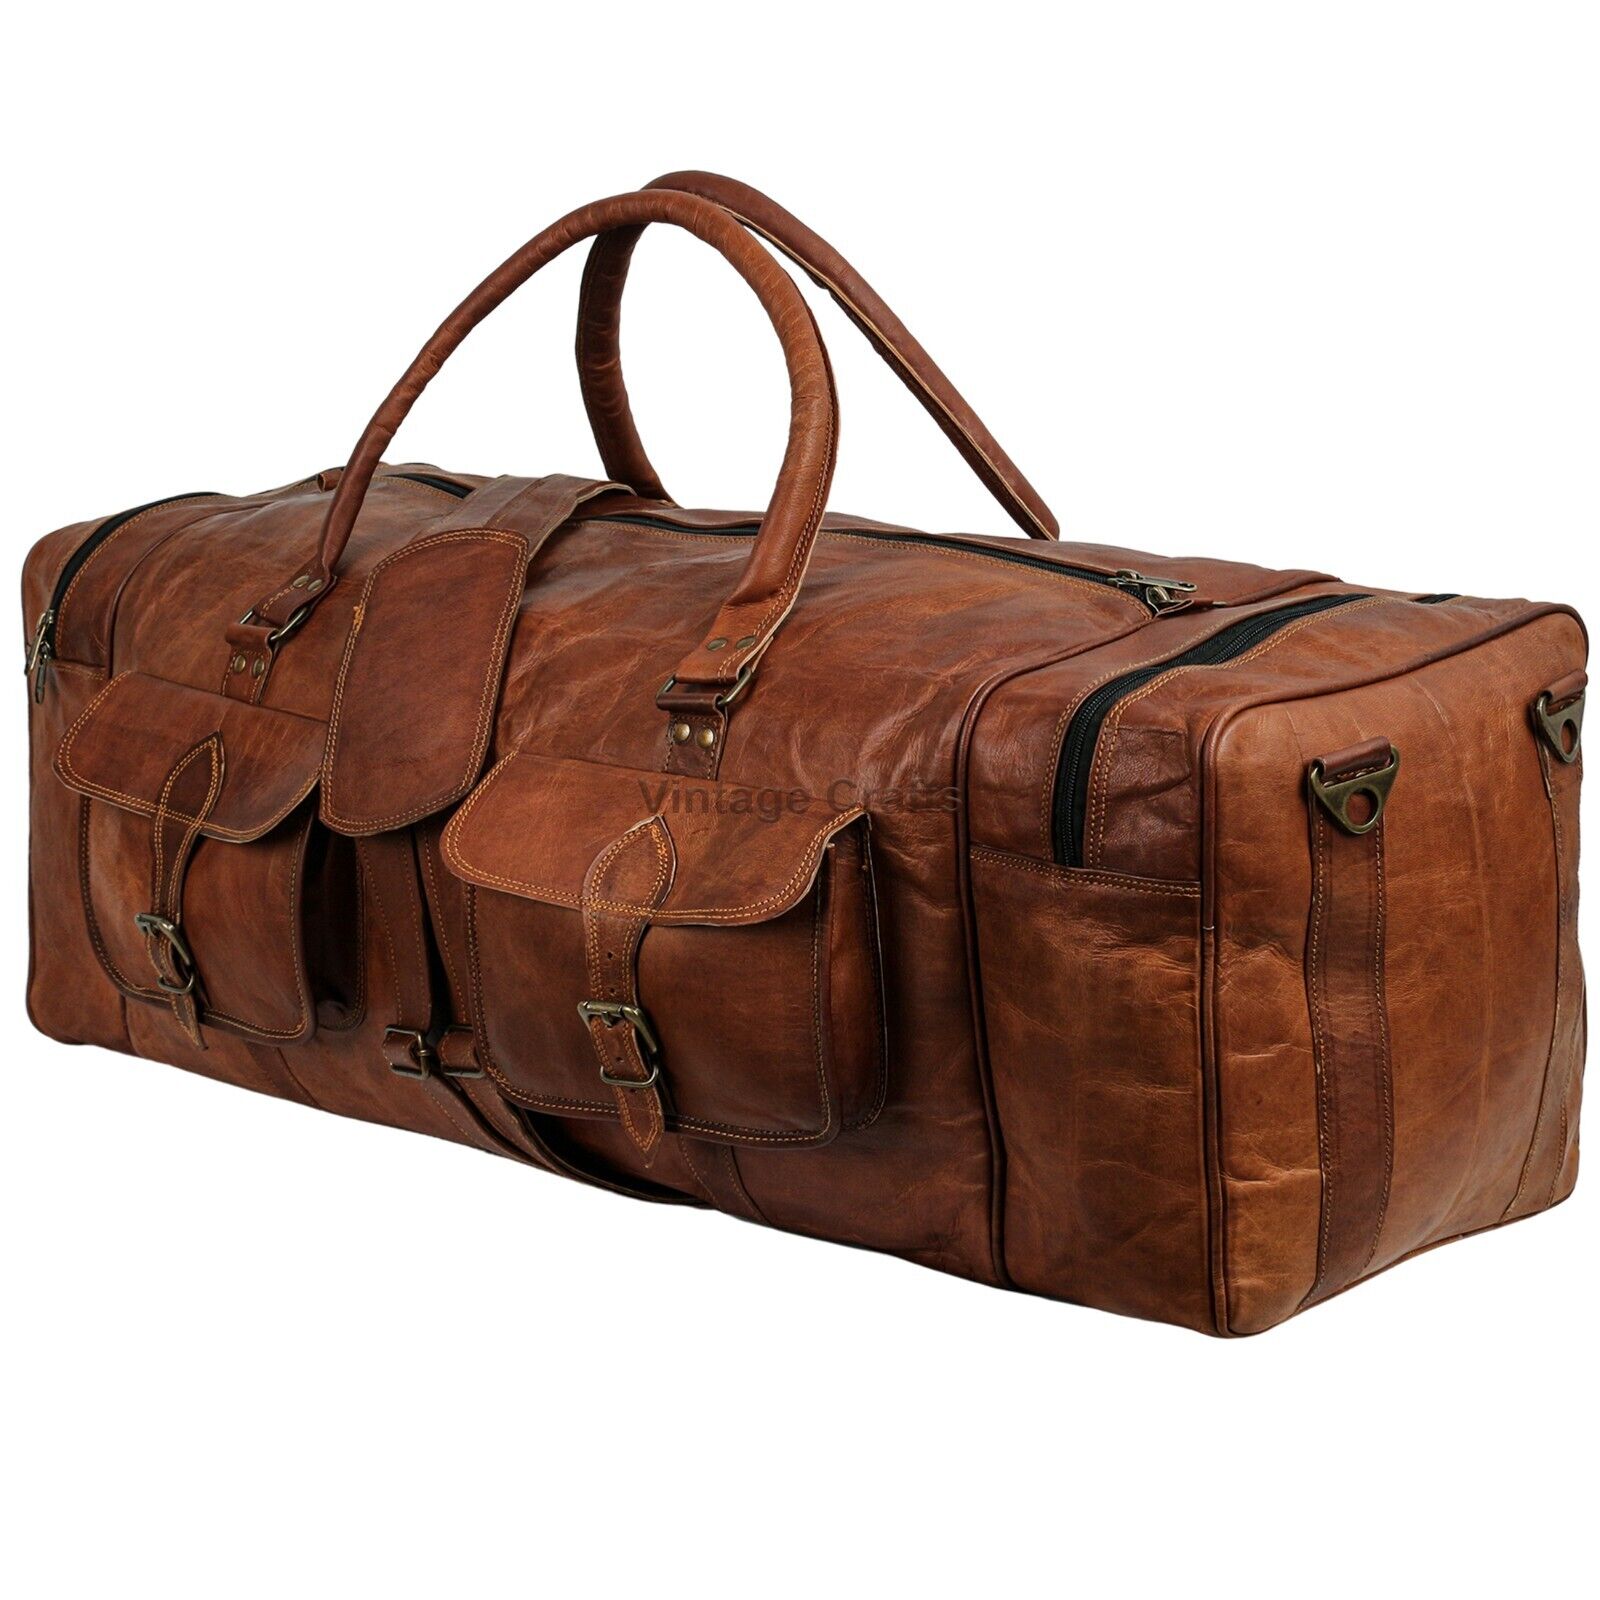 Leather Duffel Bag 32 Inch Square weekender Travel Gym Sports luggage for  unisex